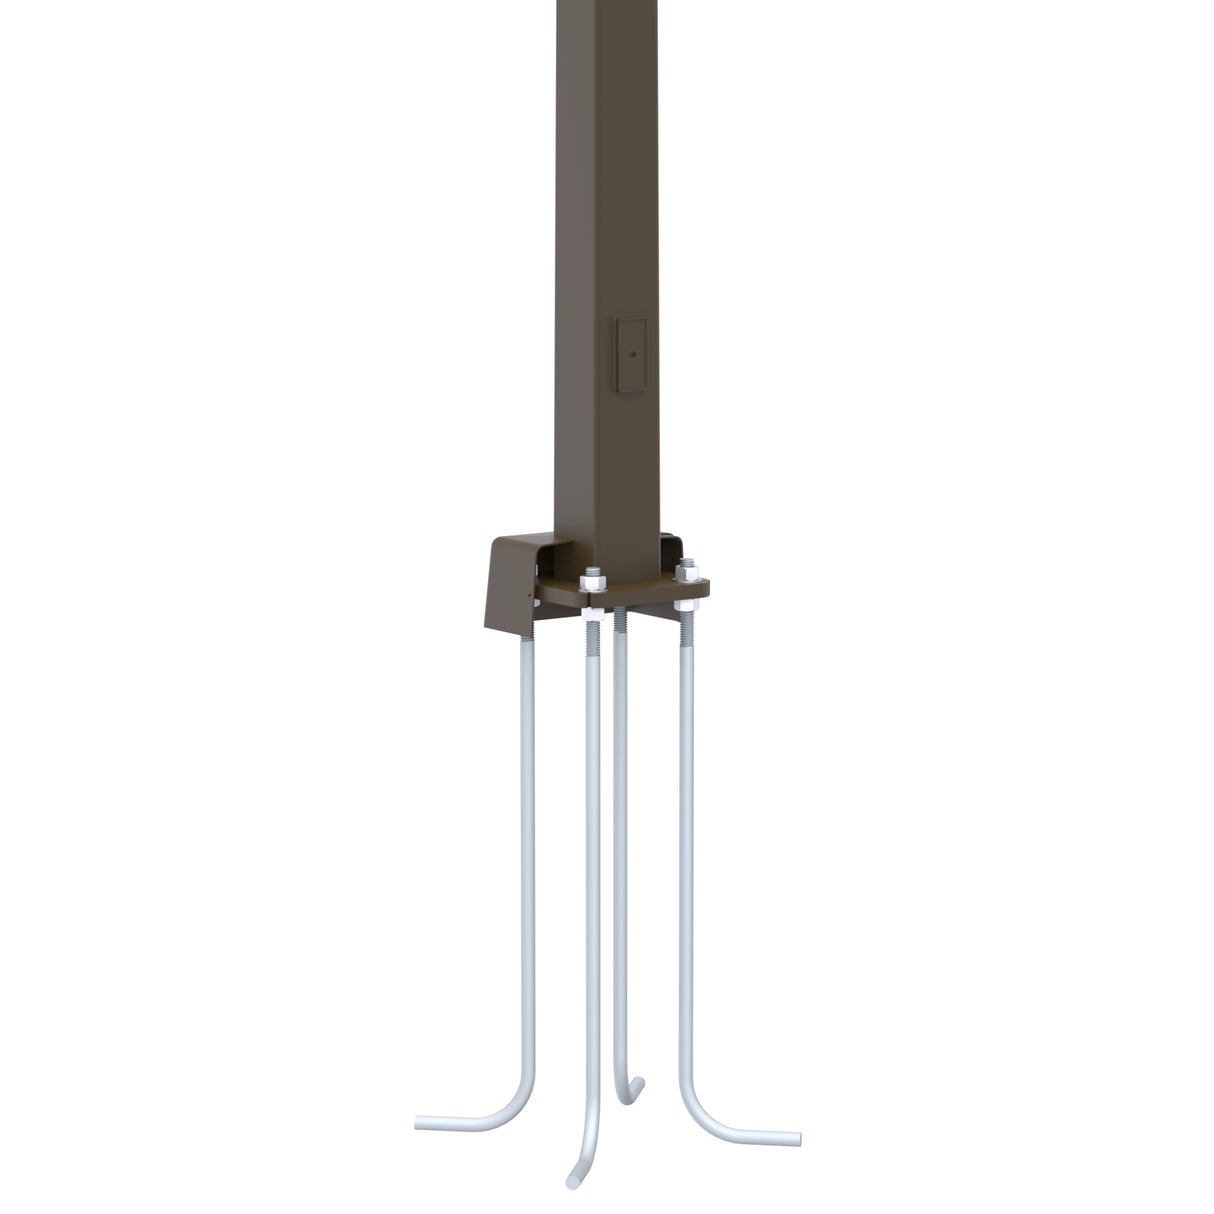 30' Tall x 6.4" Base OD x 3.1" Top OD x 11ga Thick, Square Tapered Steel, Anchor Base Light Pole